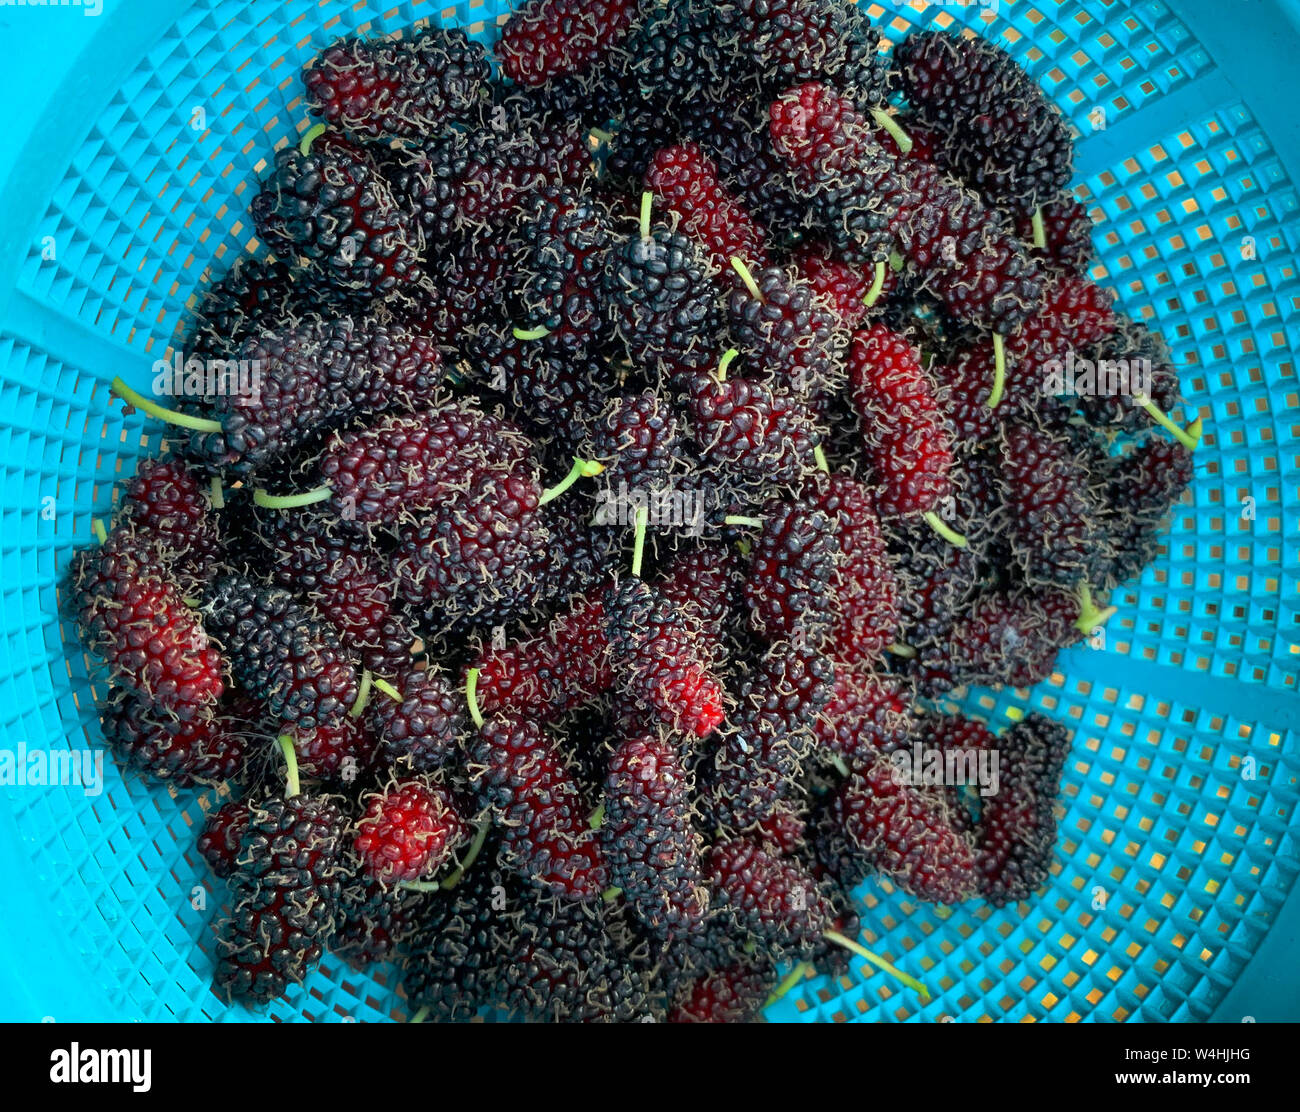 The mulberry fruits that are ripe and not ripe for health are placed in a blue basket. Stock Photo